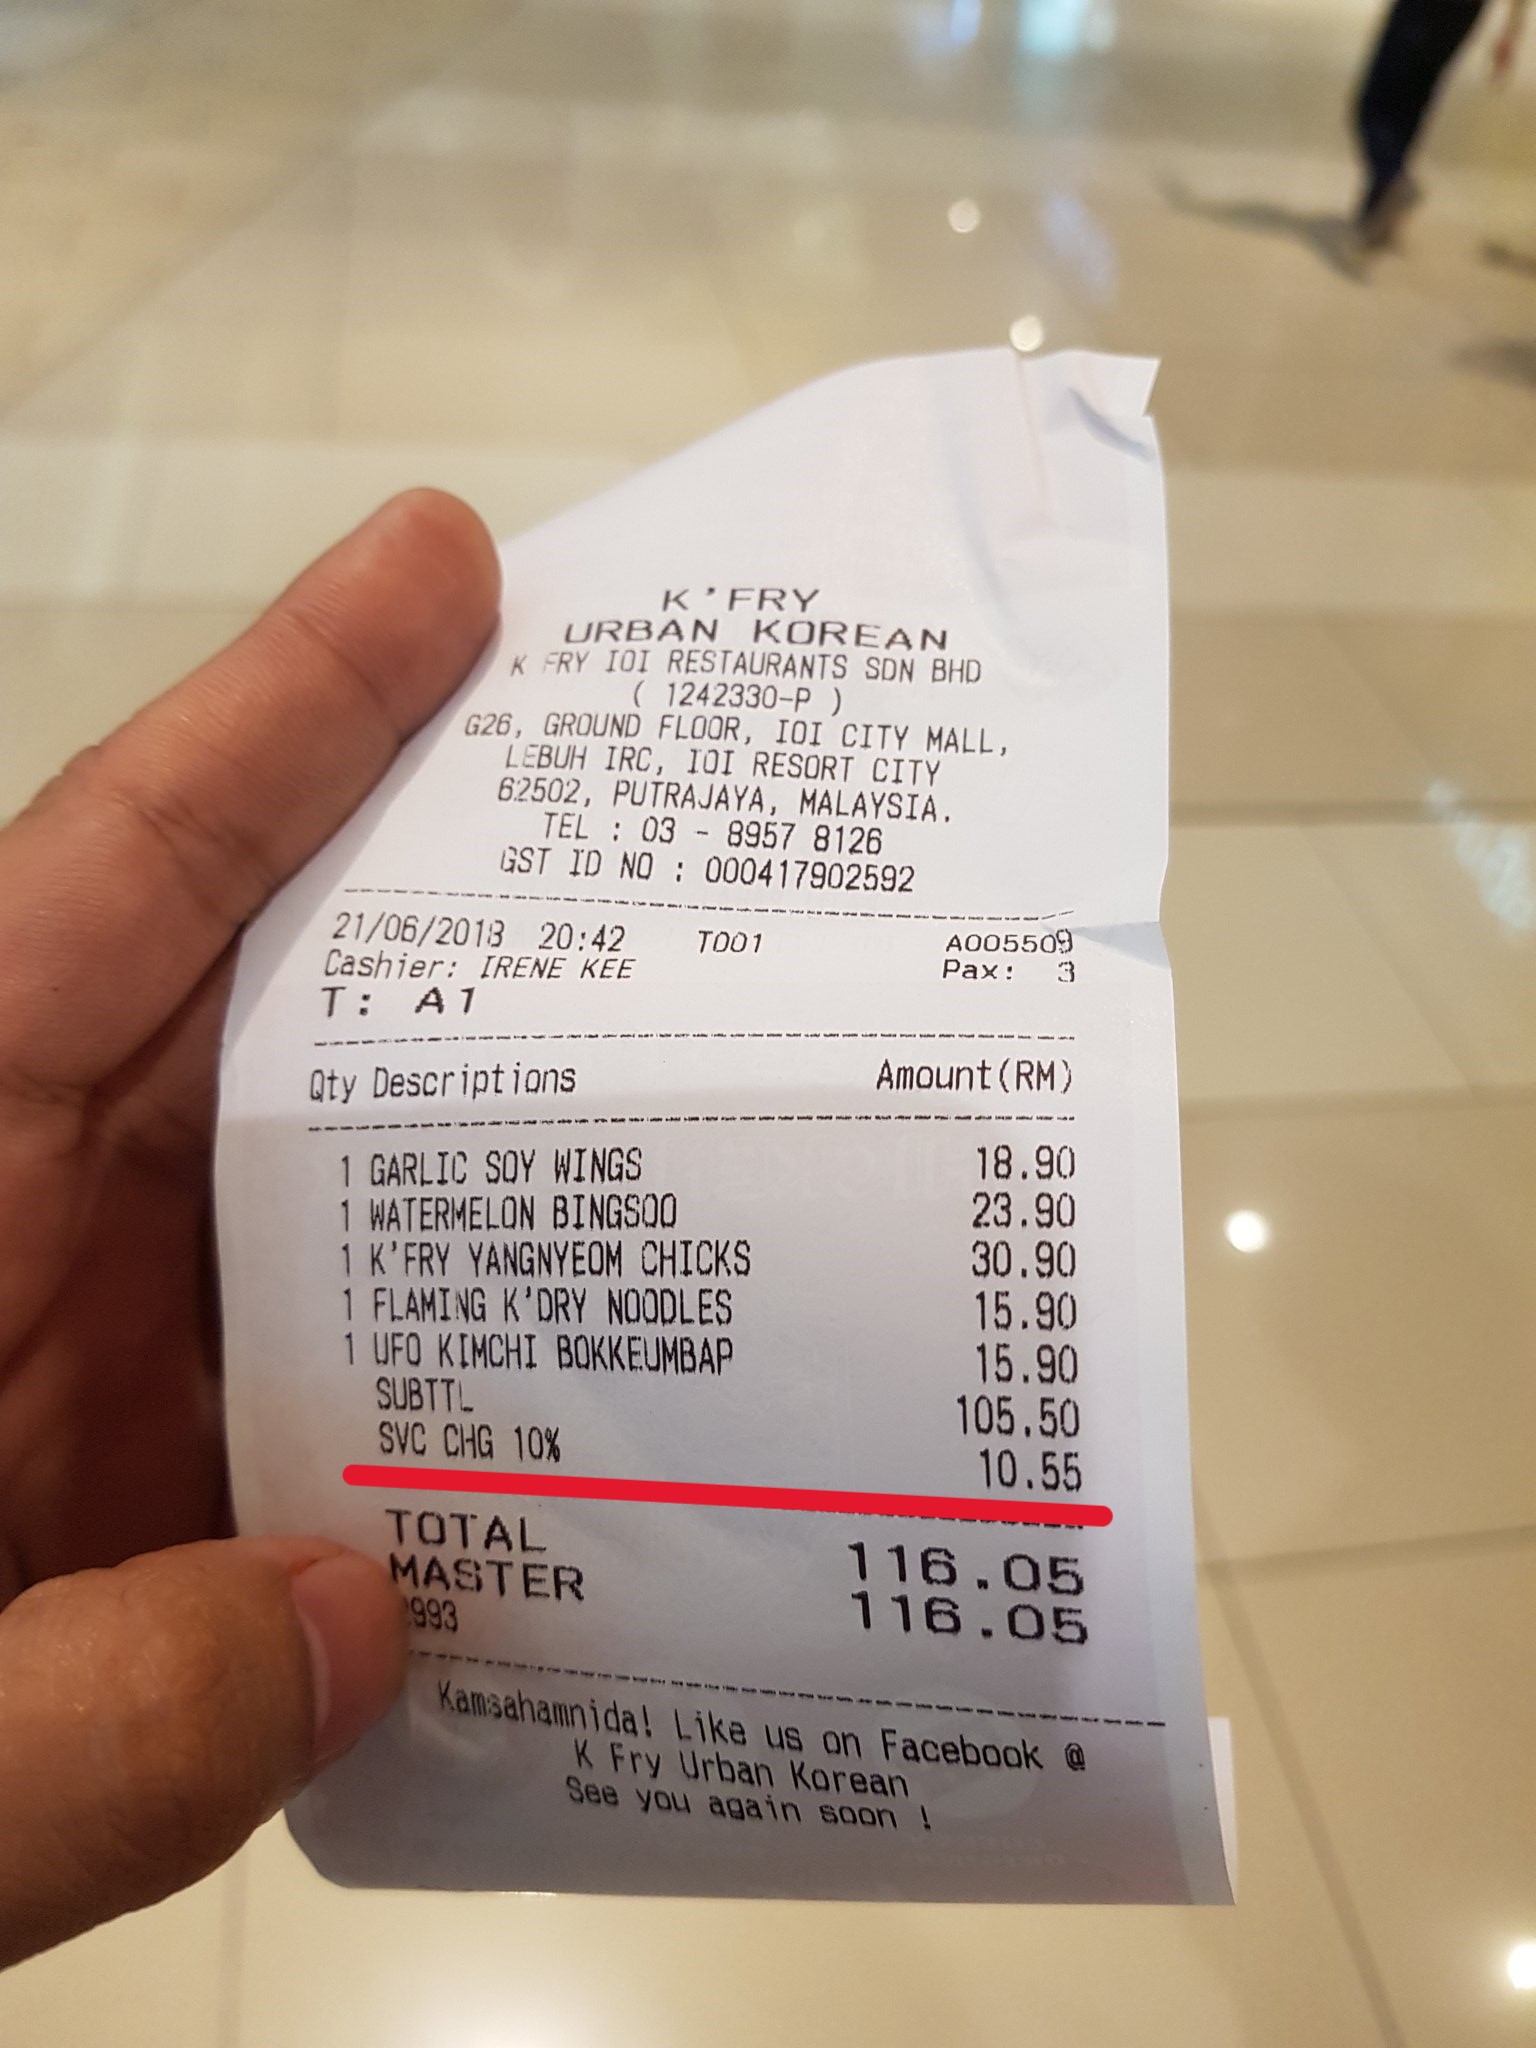 service tax and service charge